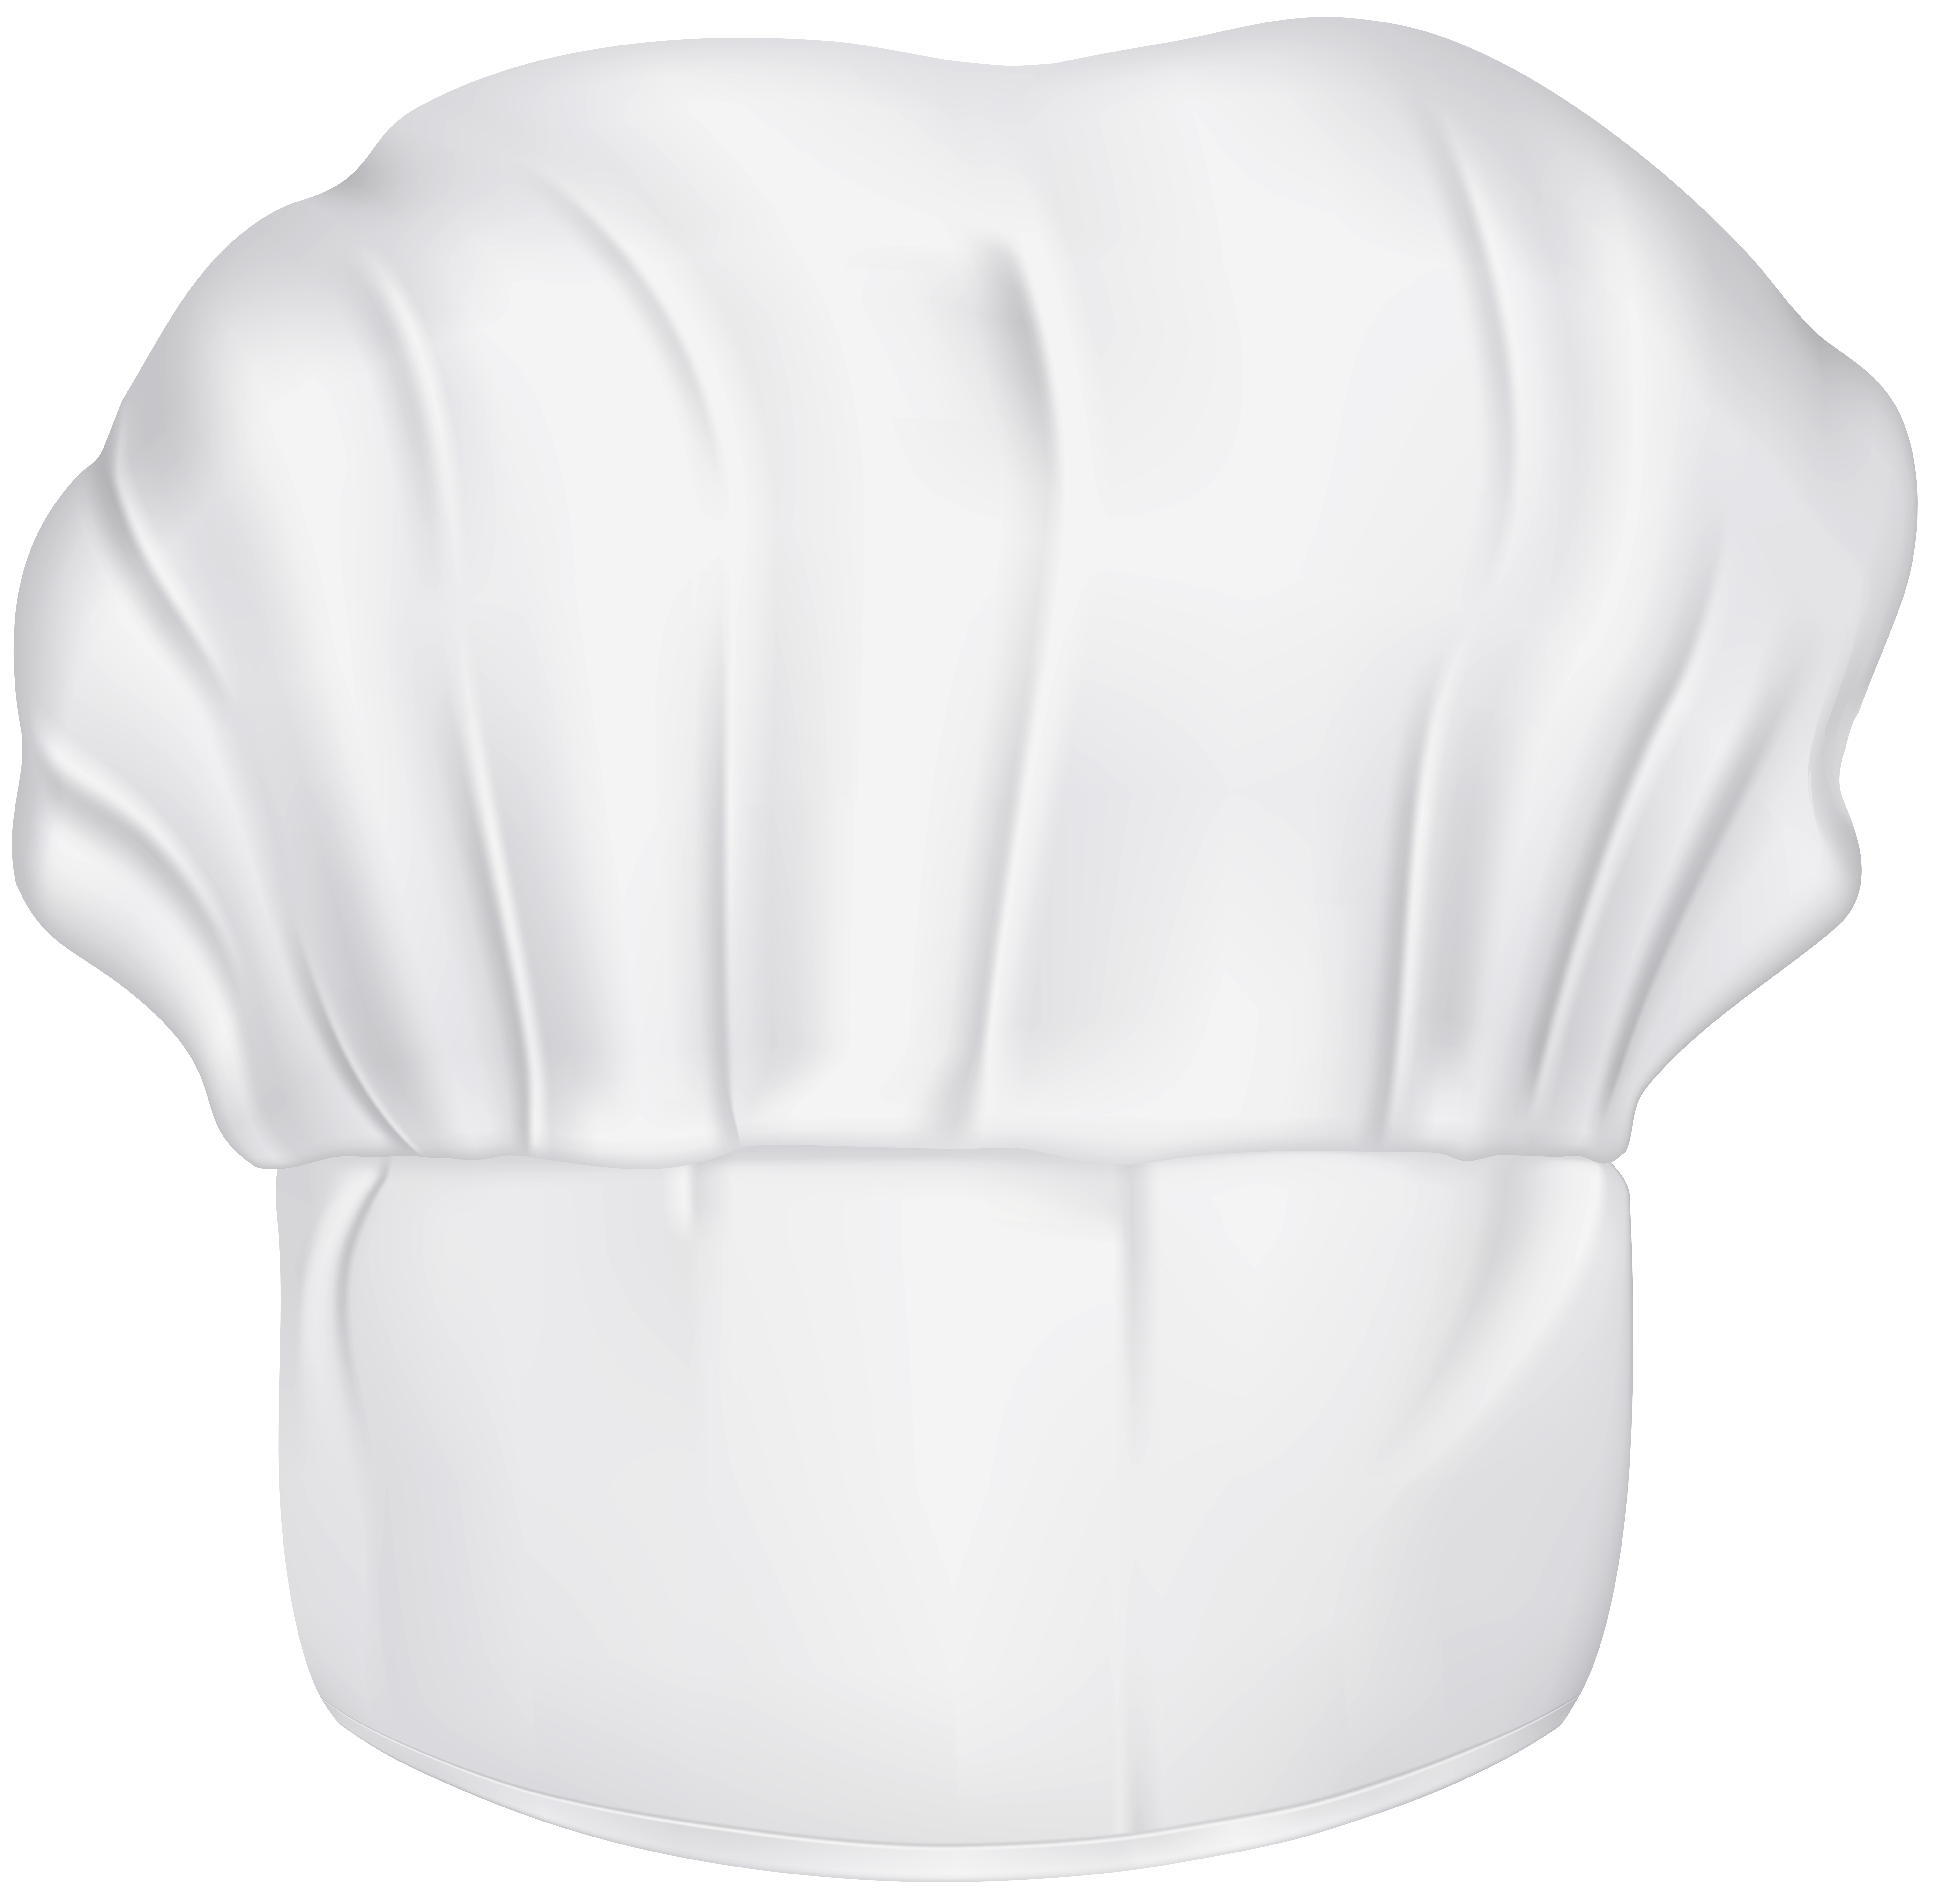 Chef Hat Png Clip Art Image Gallery Yopriceville High Quality Images And Transparent Png Free Clipart